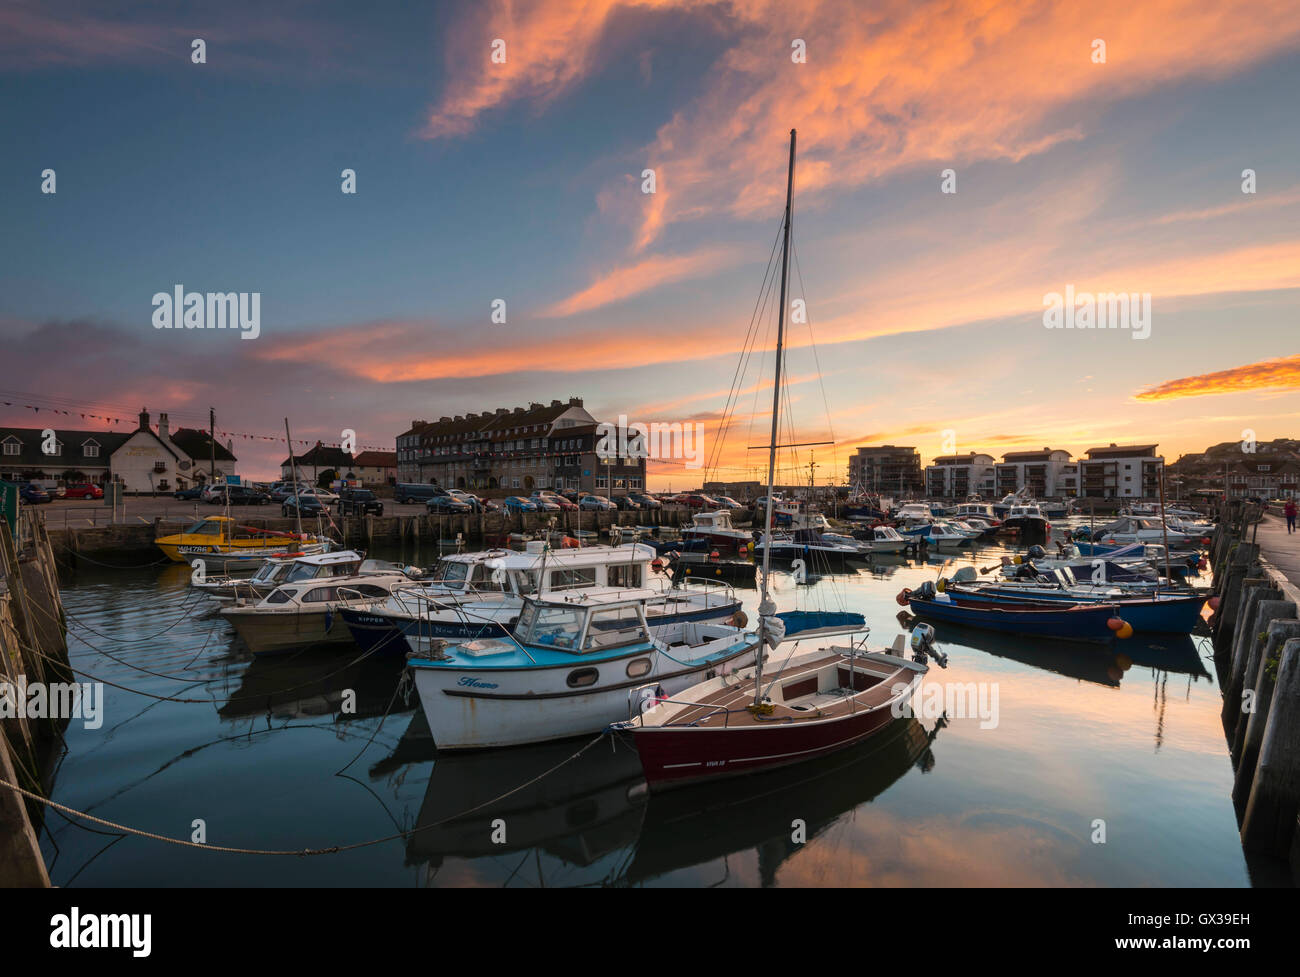 West Bay, Dorset, UK - 14th September 2016. UK Weather.  A glorious sunset illuminating the clouds above West Bay Harbour in Dorset, UK.  West Bay is one of the locations for the hit ITV series Broadchurch.  Picture: Graham Hunt/Alamy Live News Stock Photo